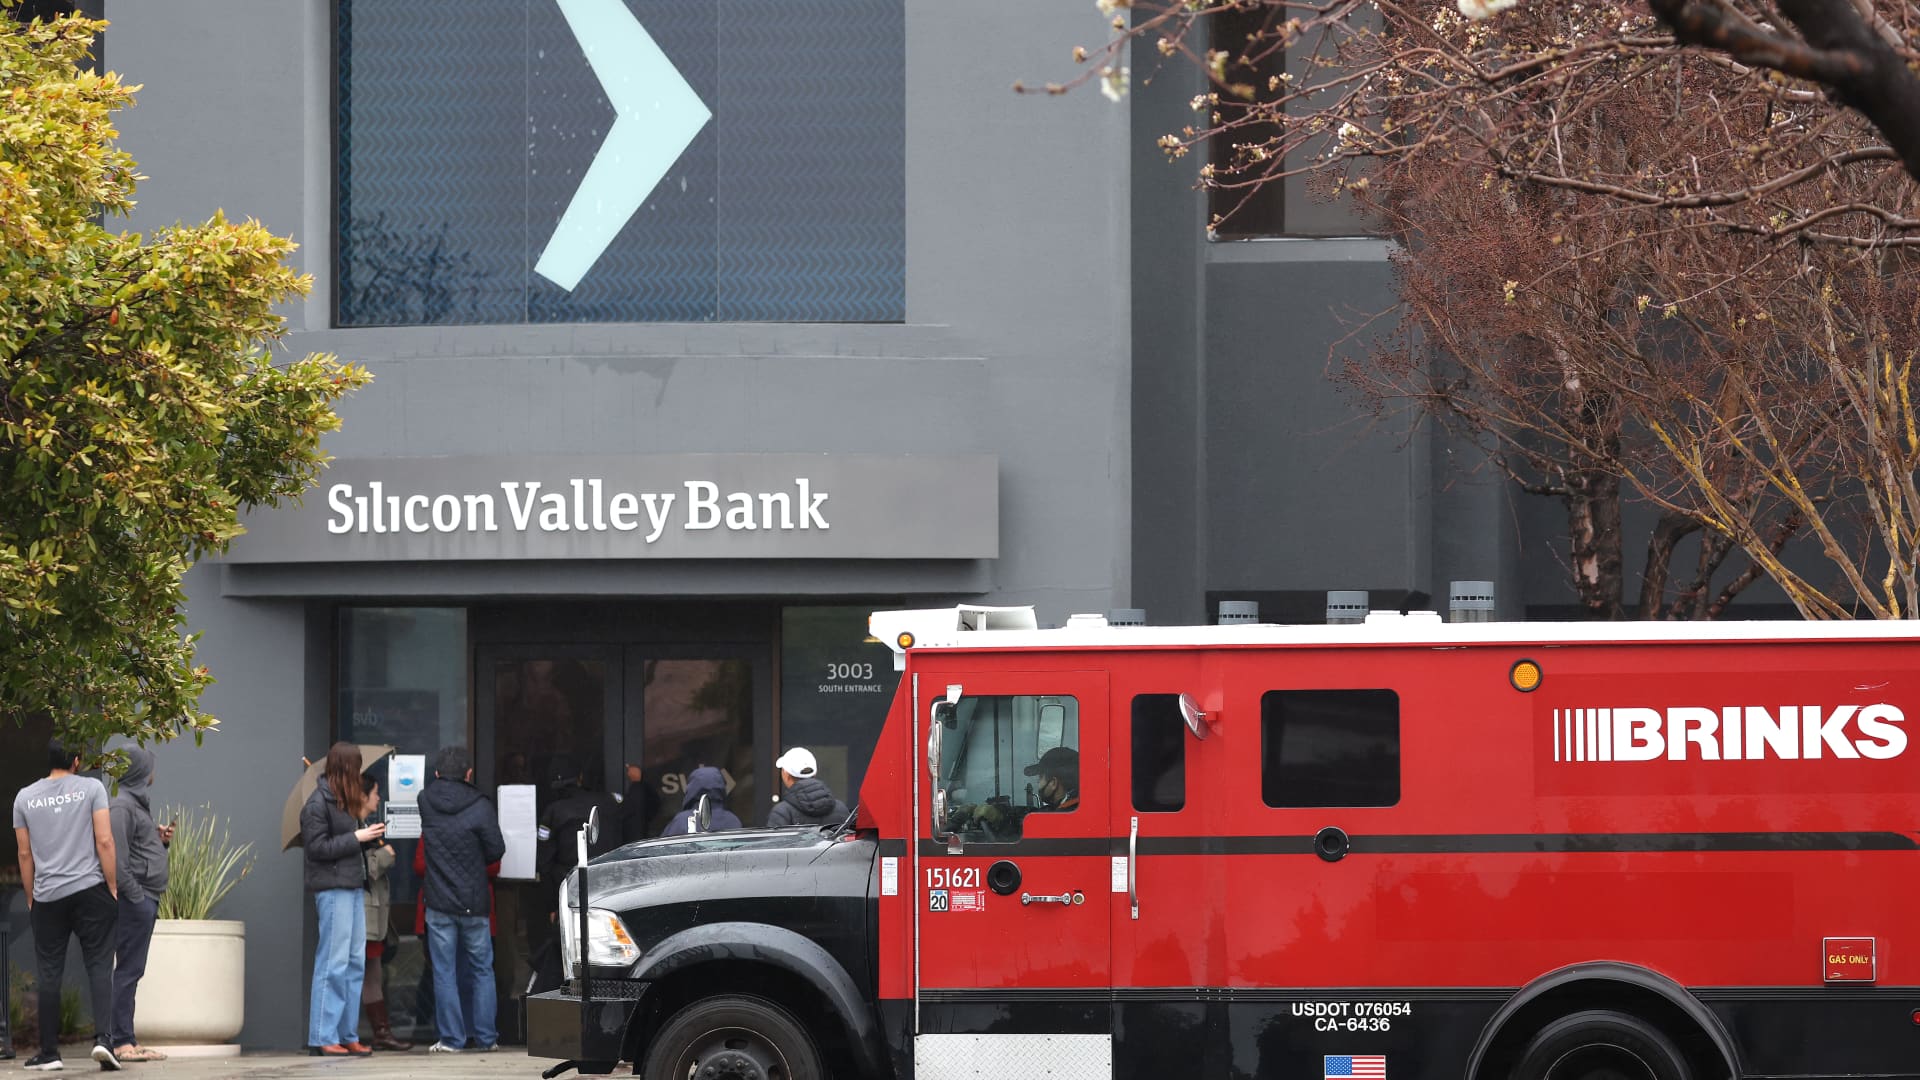 A Brinks armored truck sits parked in front of the shuttered Silicon Valley Bank (SVB) headquarters on March 10, 2023 in Santa Clara, California.